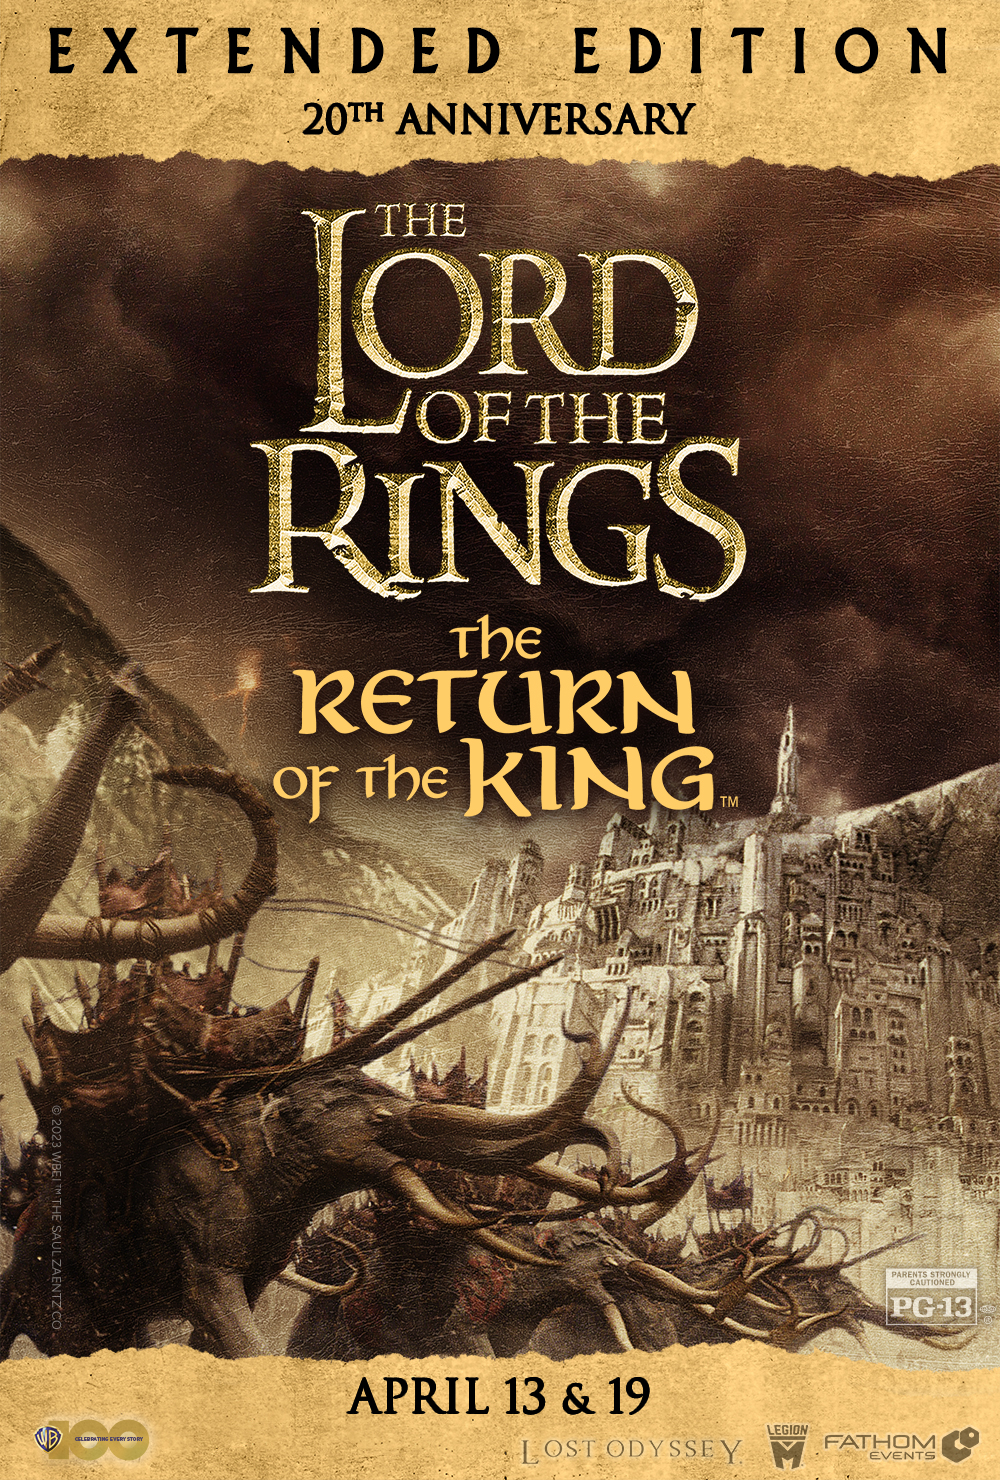 The Lord of the Rings - The Return of the King - The Complete